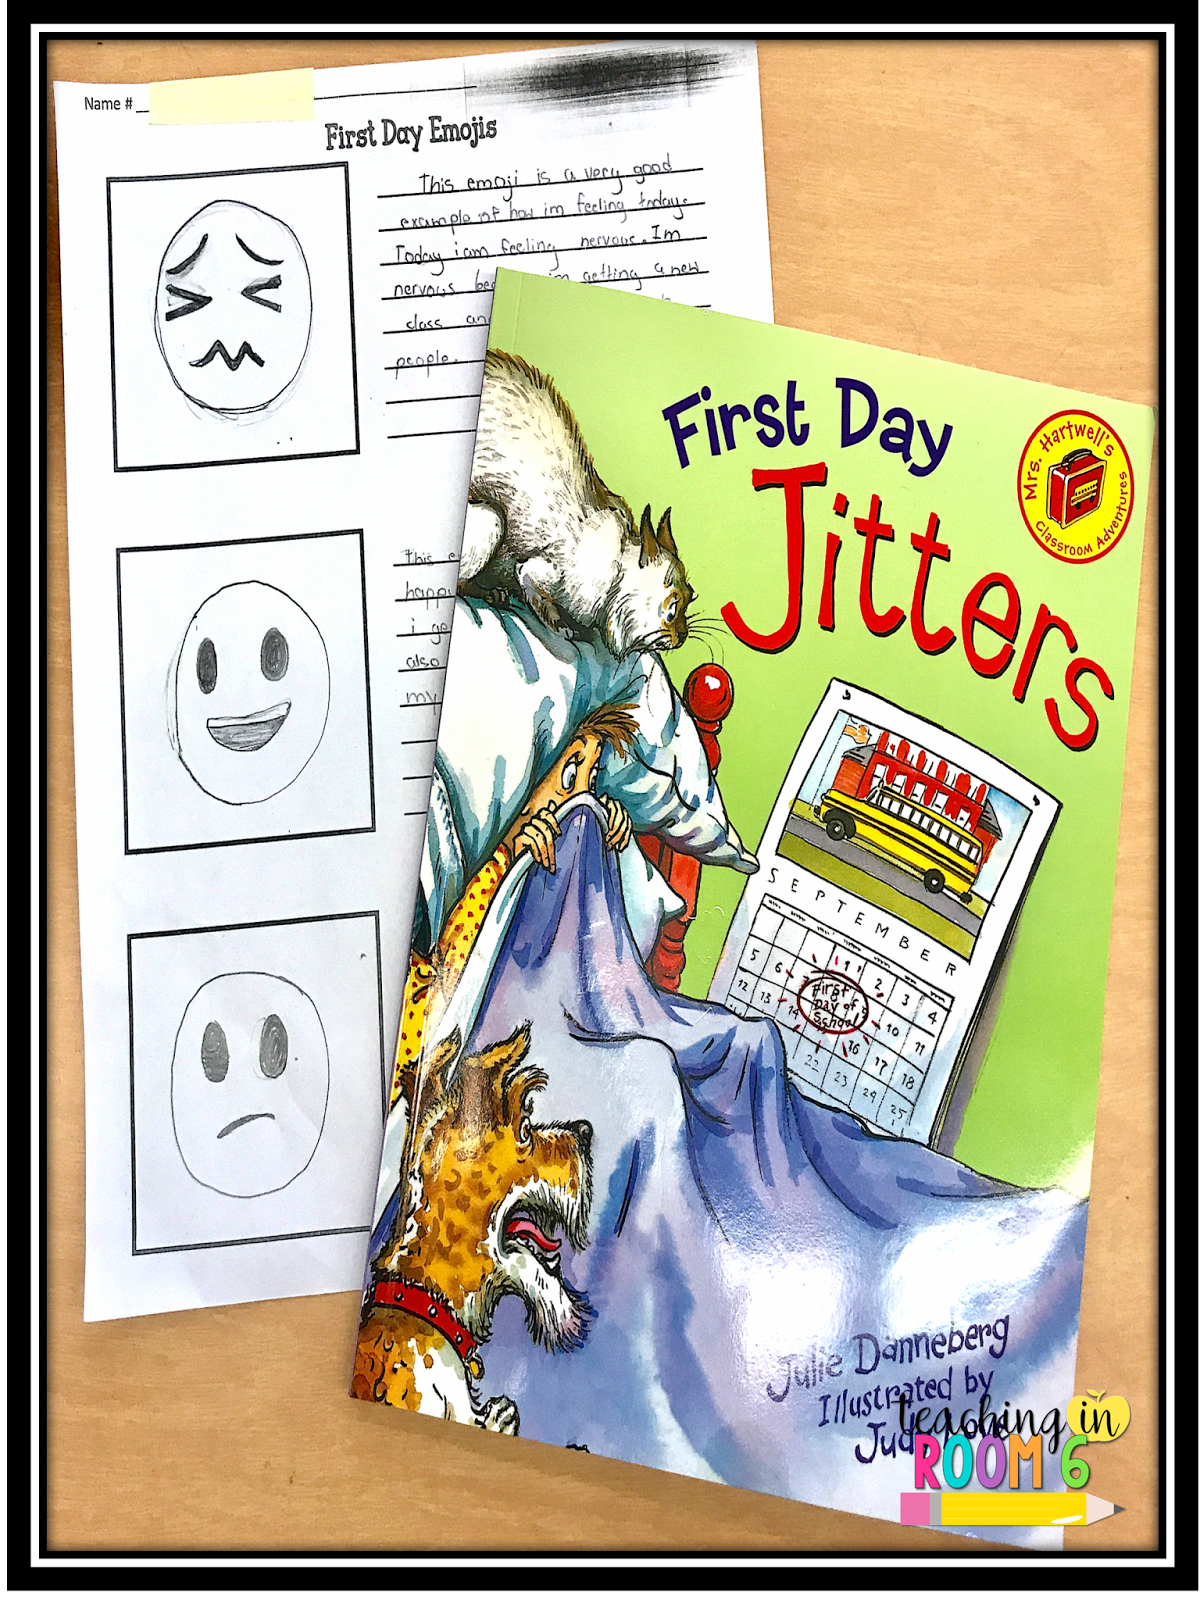 Teaching In Room 6: First Day Jitters In Upper Elementary